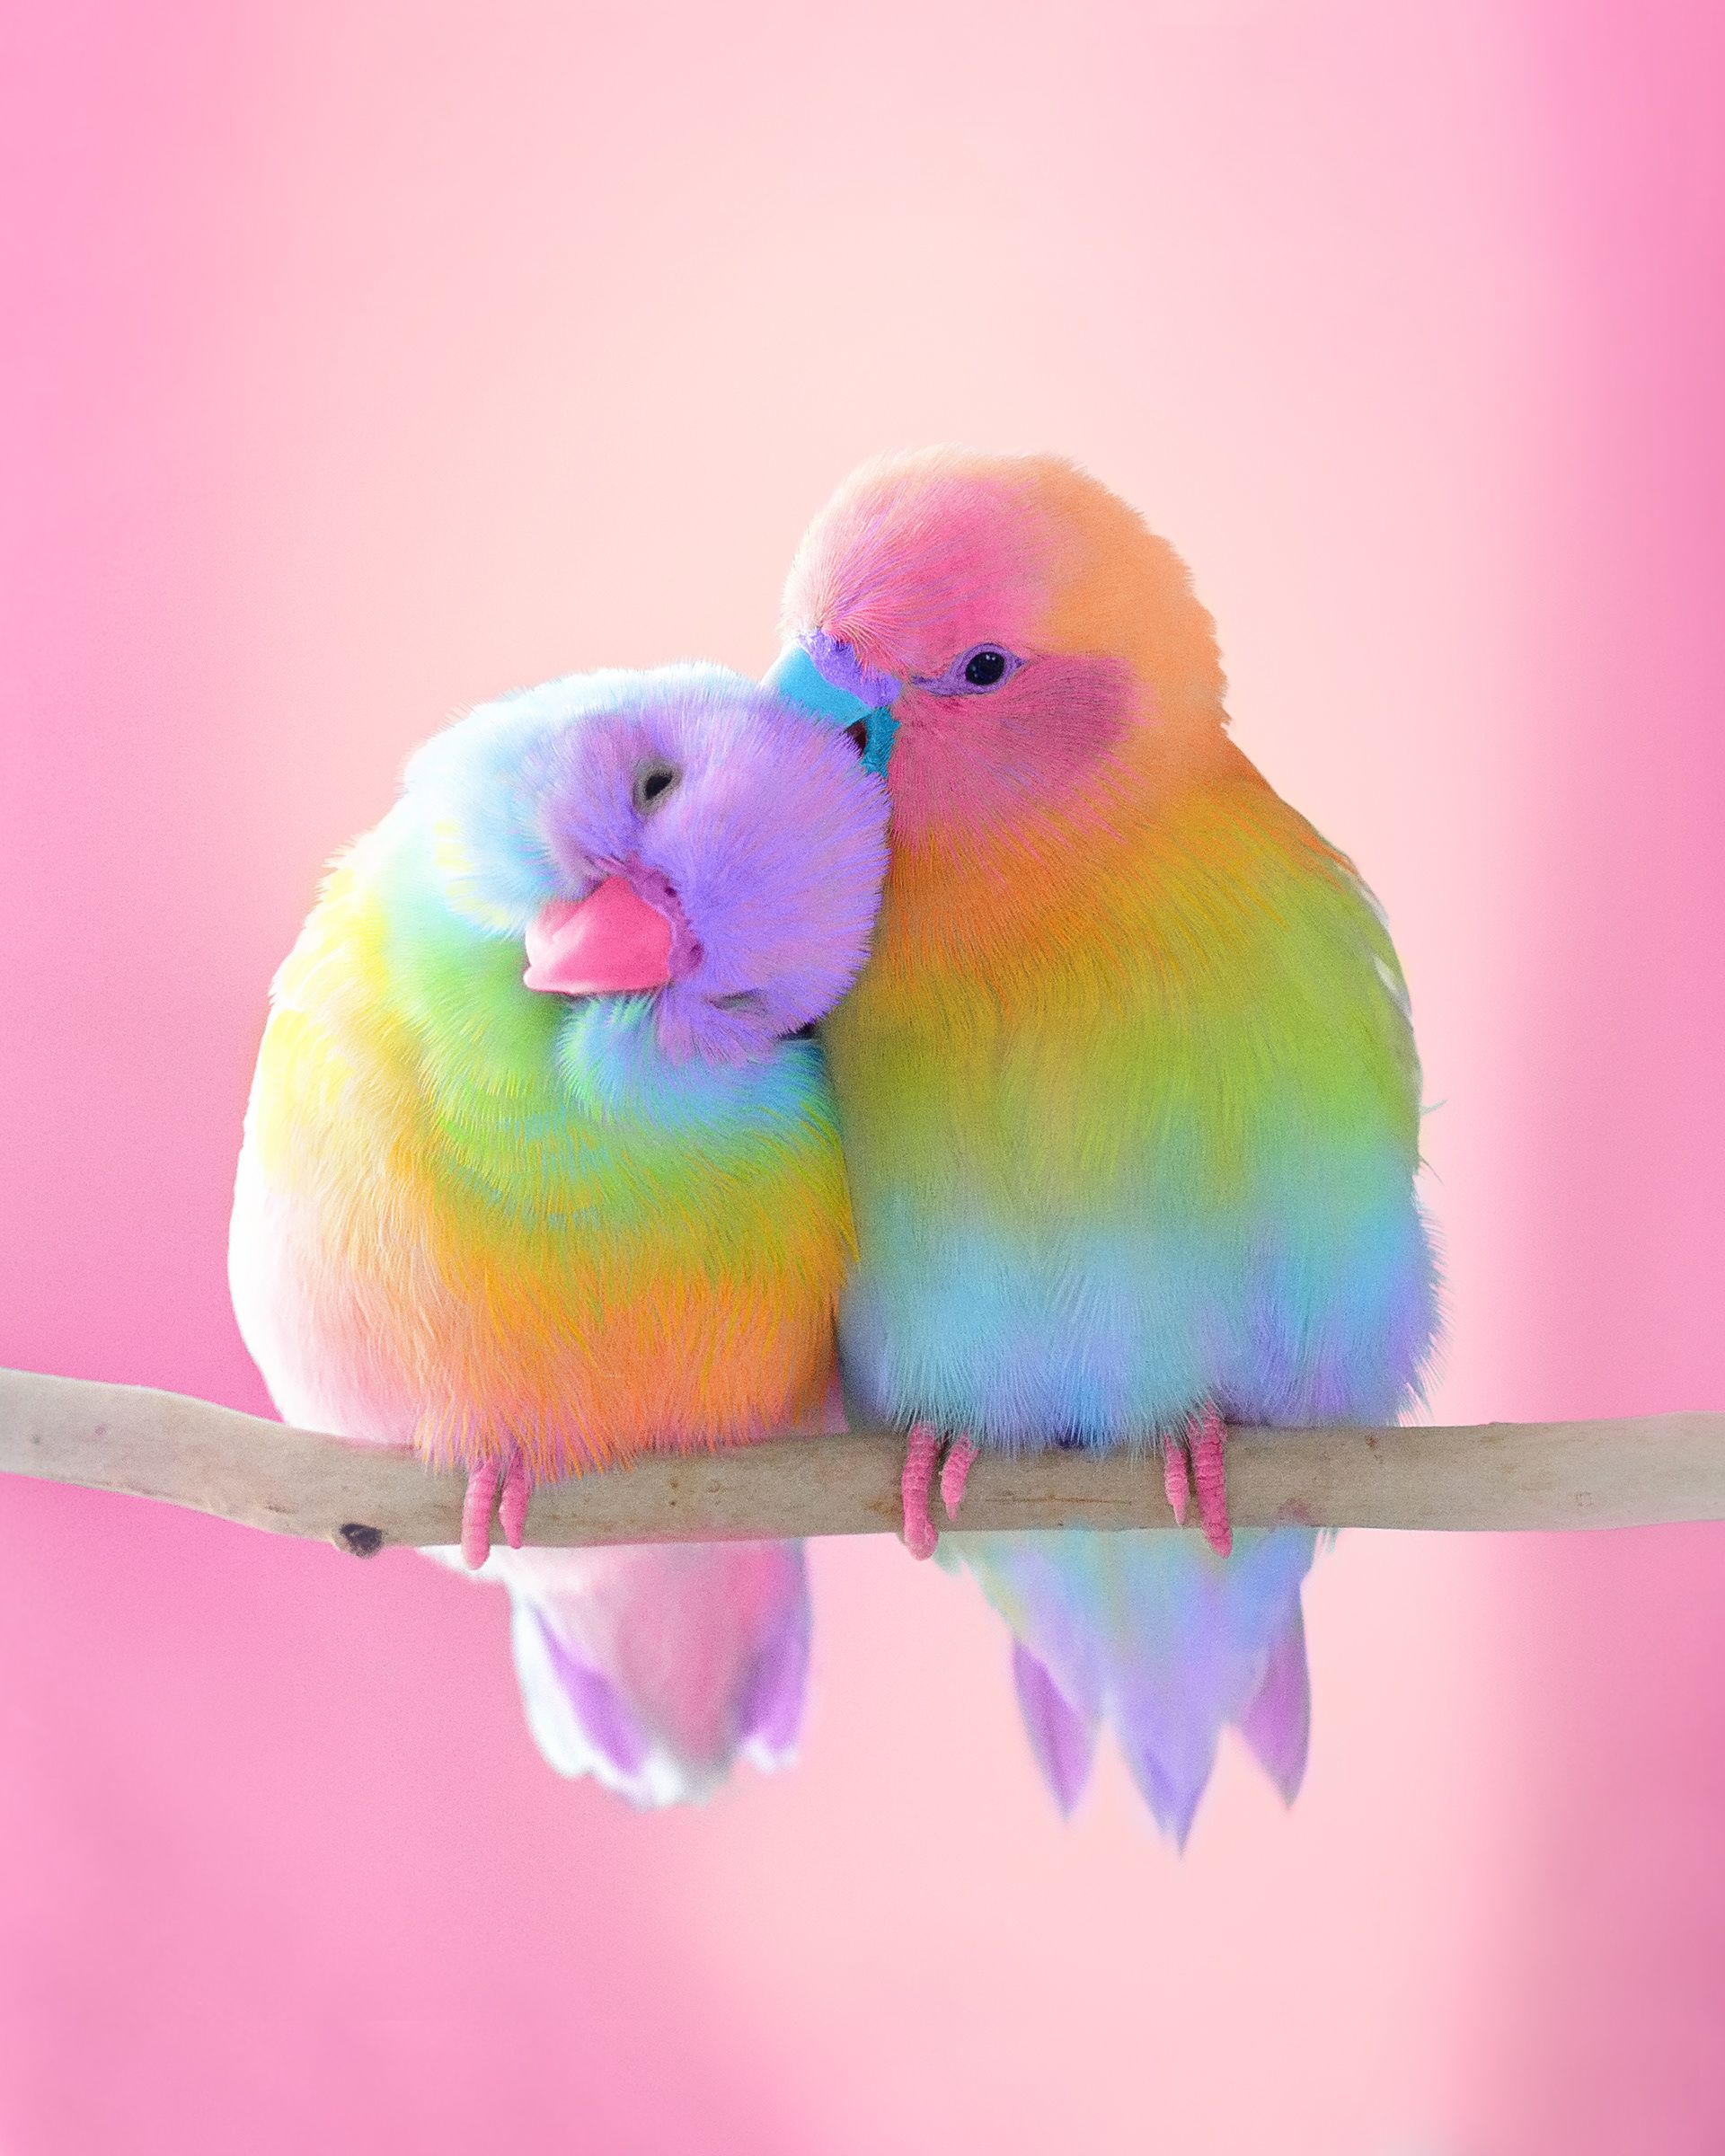 Animals In Rainbow Colors Cute Birds Colorful